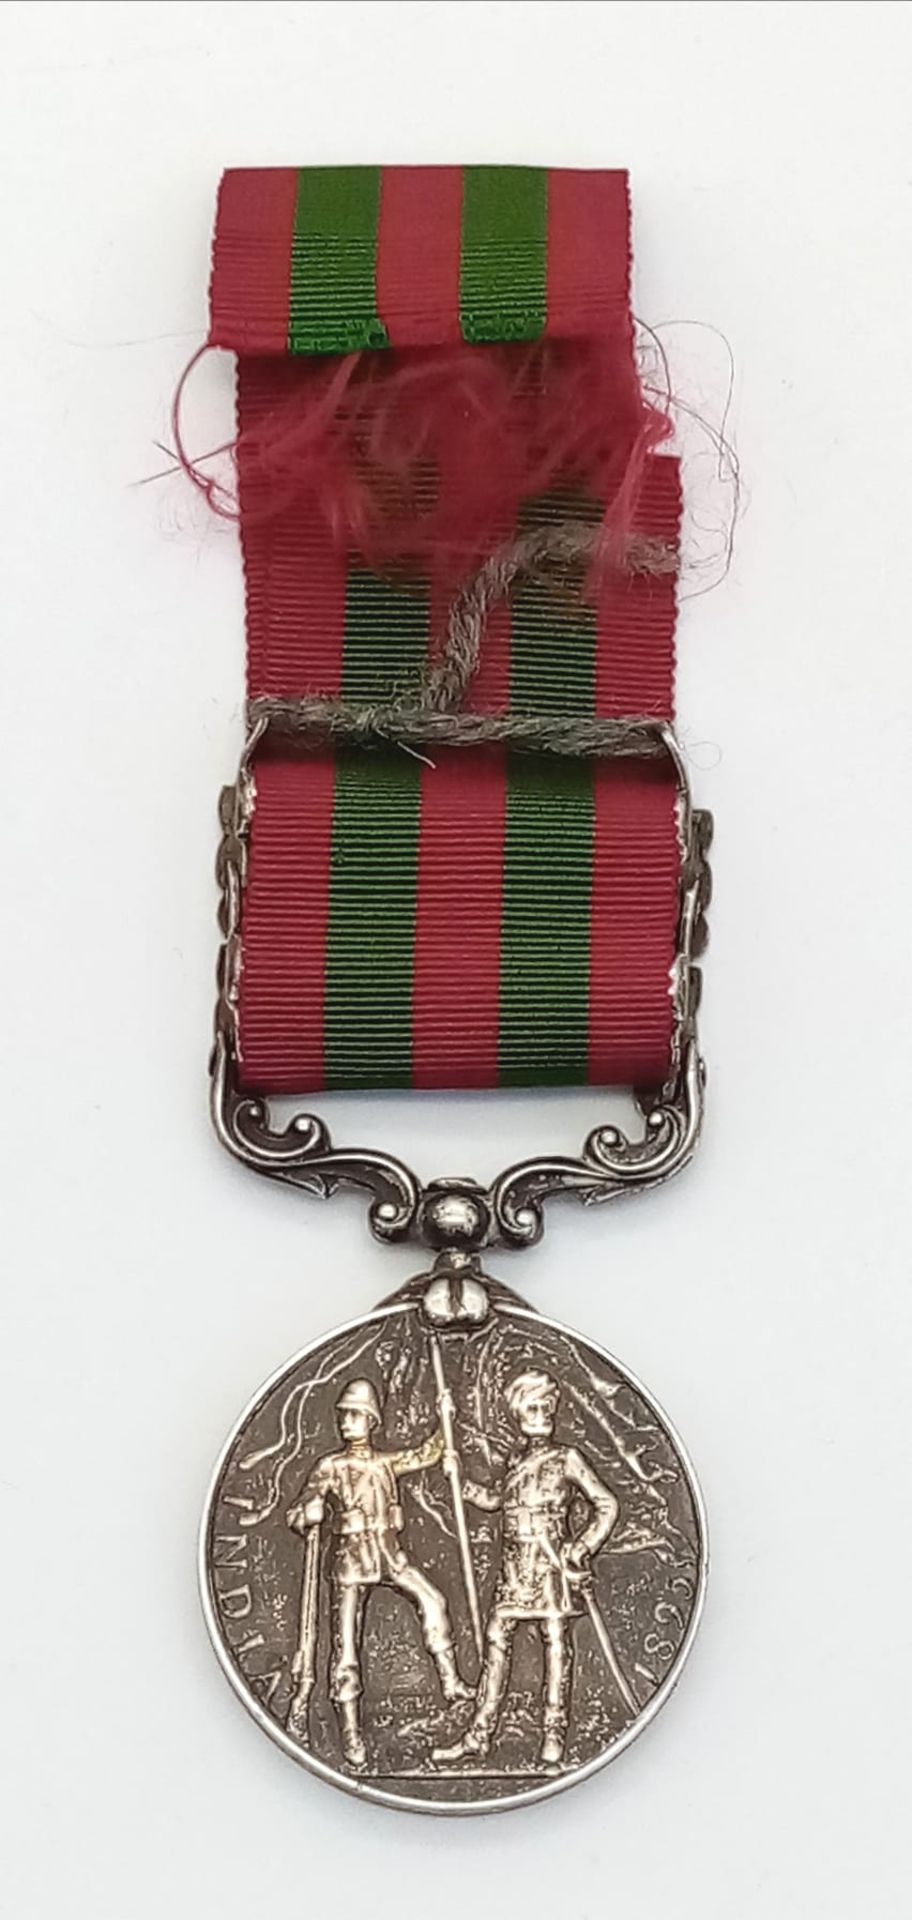 Indian General Service Medal with 2 Clasps, Tibah 1897-98 & Punjab Frontier 1897-98. Named to Pte A. - Image 2 of 2